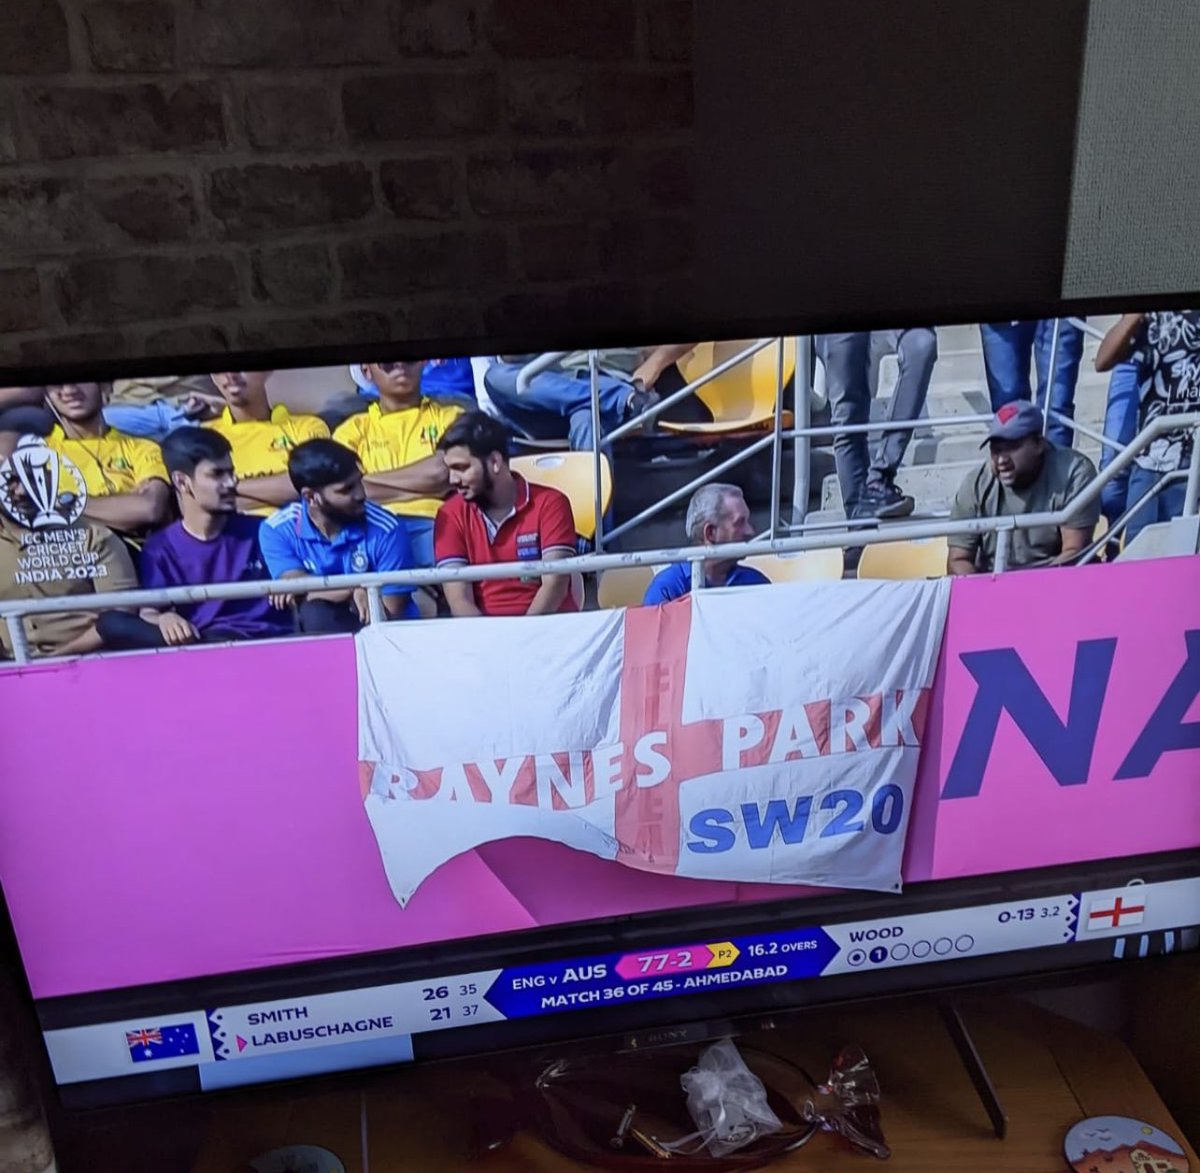 🔵🔴 The world’s best suburb of Wimbledon seen today at England vs Austrailia in the Cricket Word Cup. Go on the #RaynesPark. Good on you fellas @TheBarmyArmy SW20 rules. 🏏